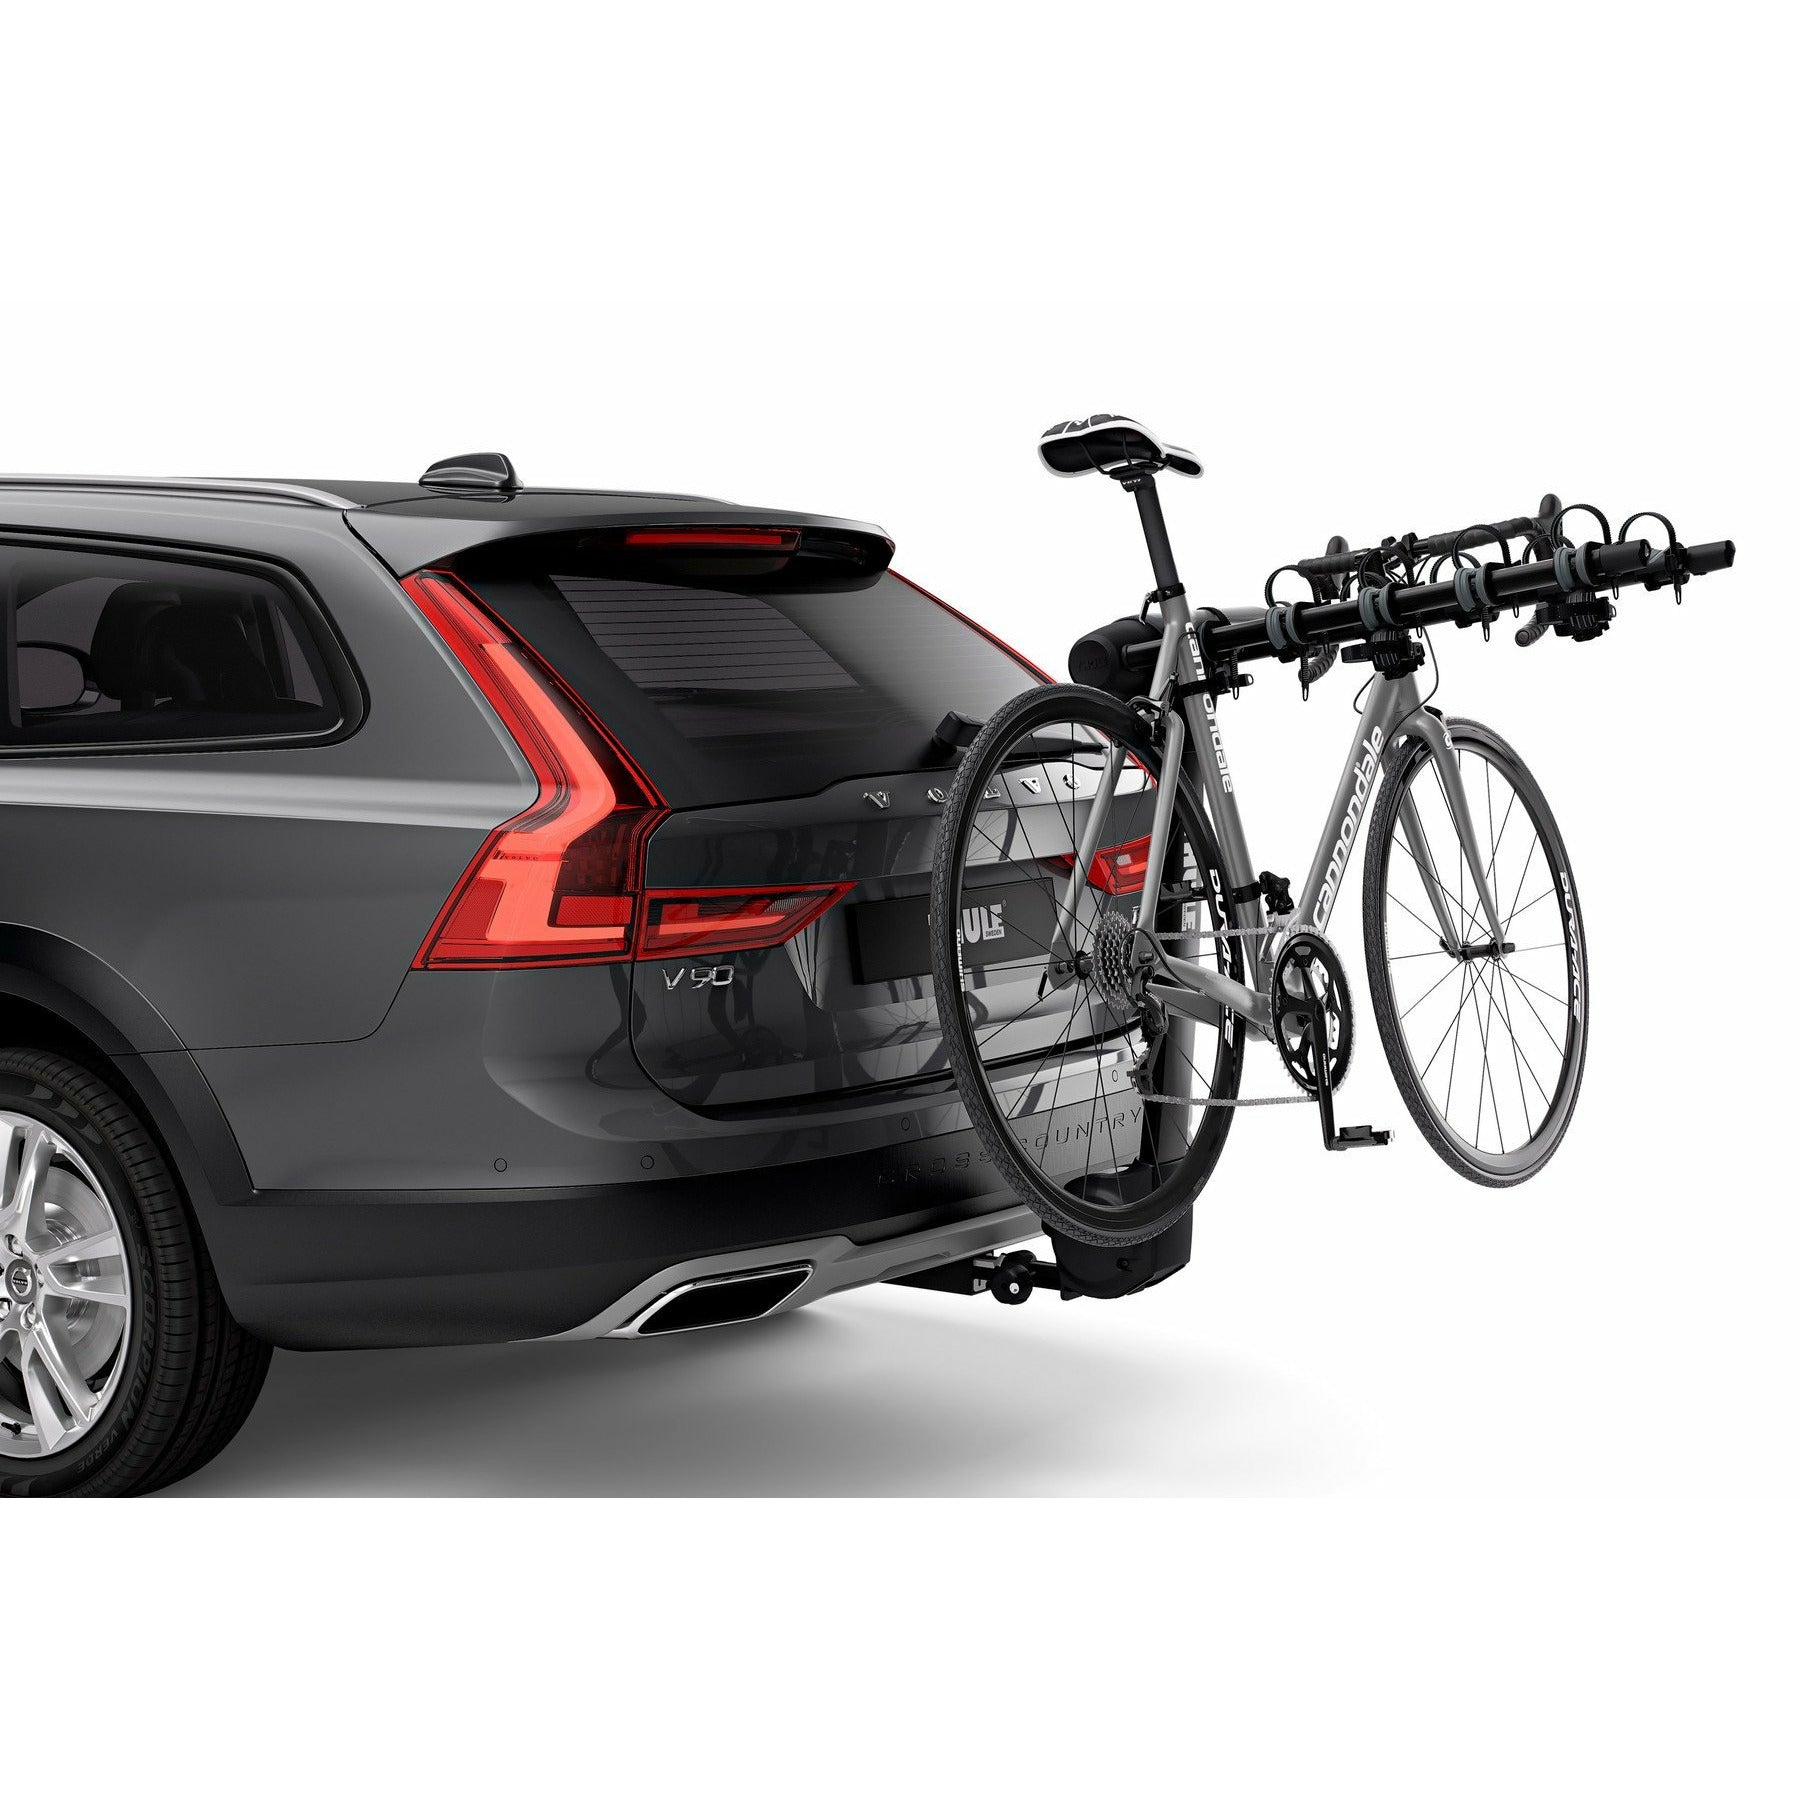 The most versatile bike rack for all types of bikes / Thule Epos